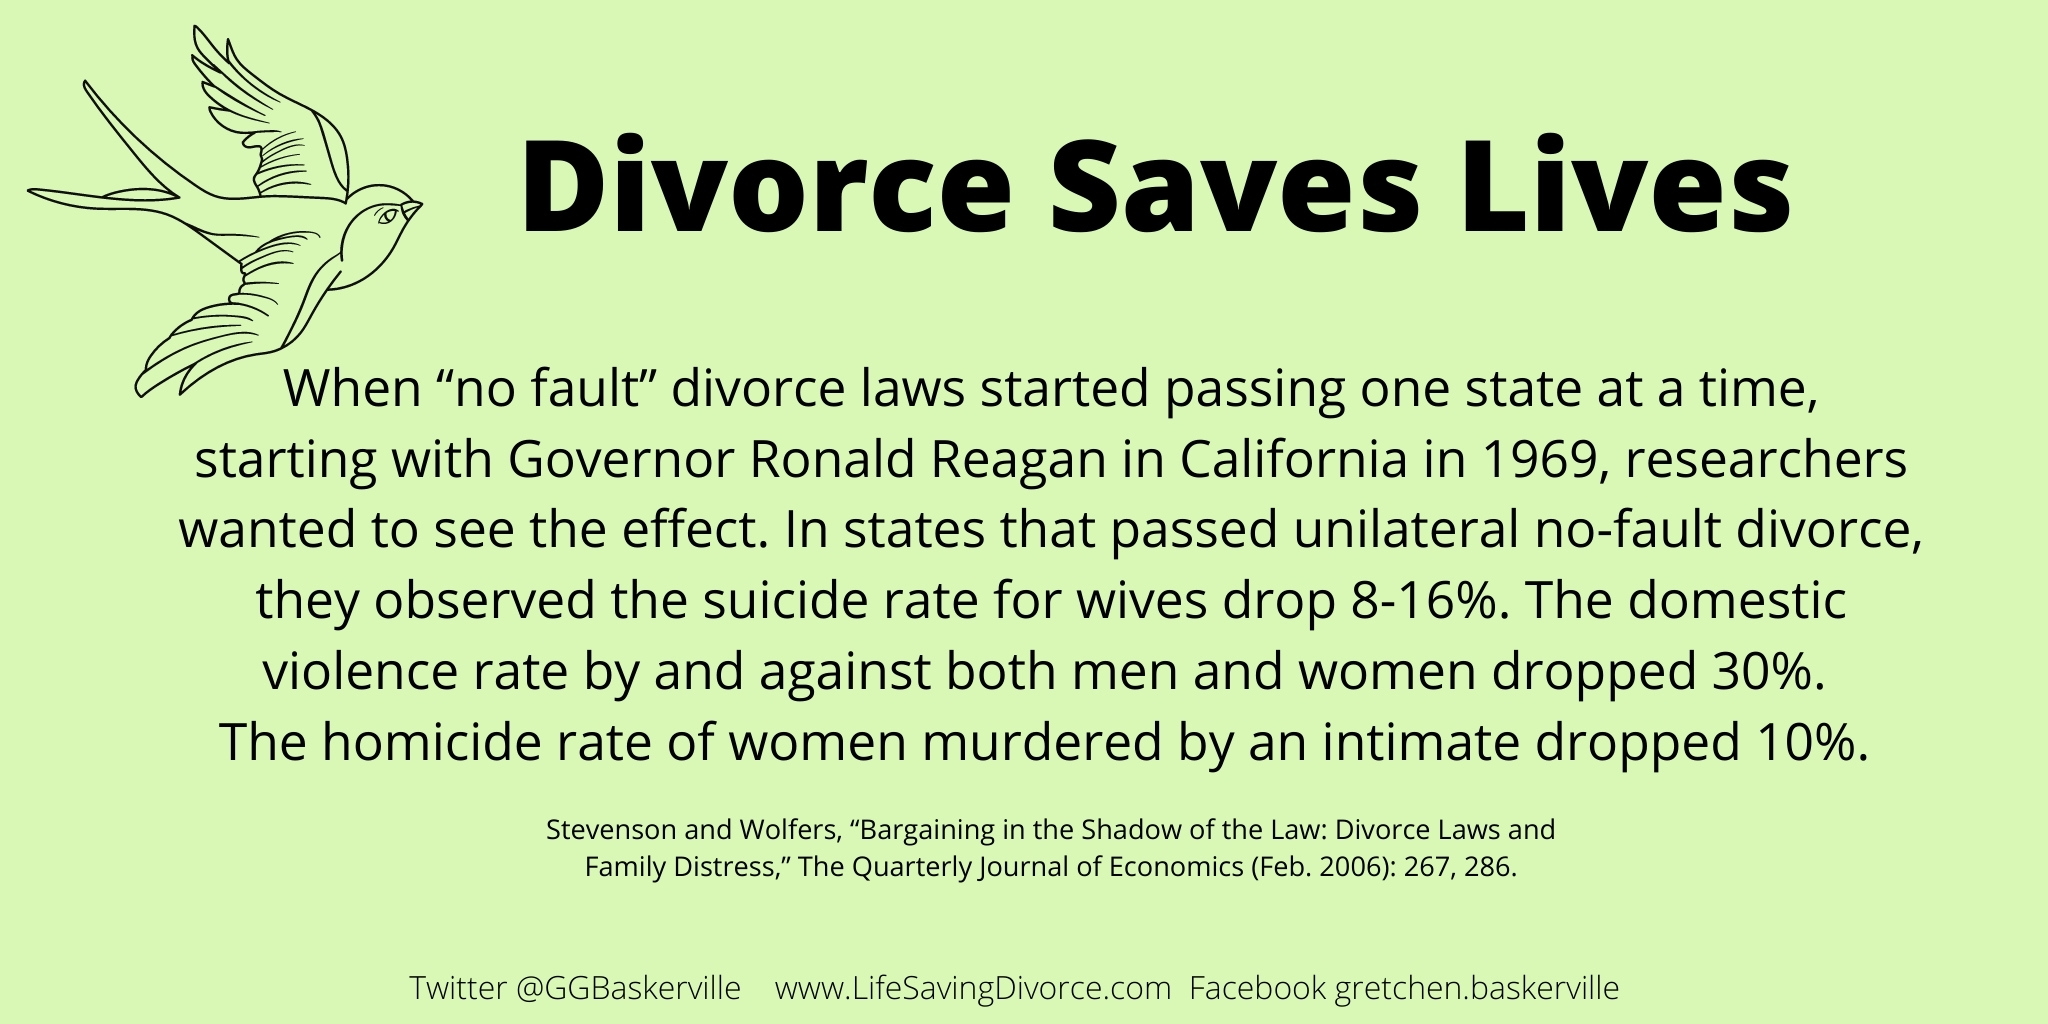 Divorce Saves Lives. When “no fault” divorce laws started passing one state at a time, starting with Governor Ronald Reagan in California in 1969, researchers wanted to see the effect. In states that passed unilateral no-fault divorce, they observed the suicide rate for wives drop 8-16%. The domestic violence rate by and against both men and women dropped 30%.  The homicide rate of women murdered by an intimate dropped 10%.   Stevenson and Wolfers, “Bargaining in the Shadow of the Law: Divorce Laws and Family Distress,” The Quarterly Journal of Economics (Feb. 2006): 267, 286.